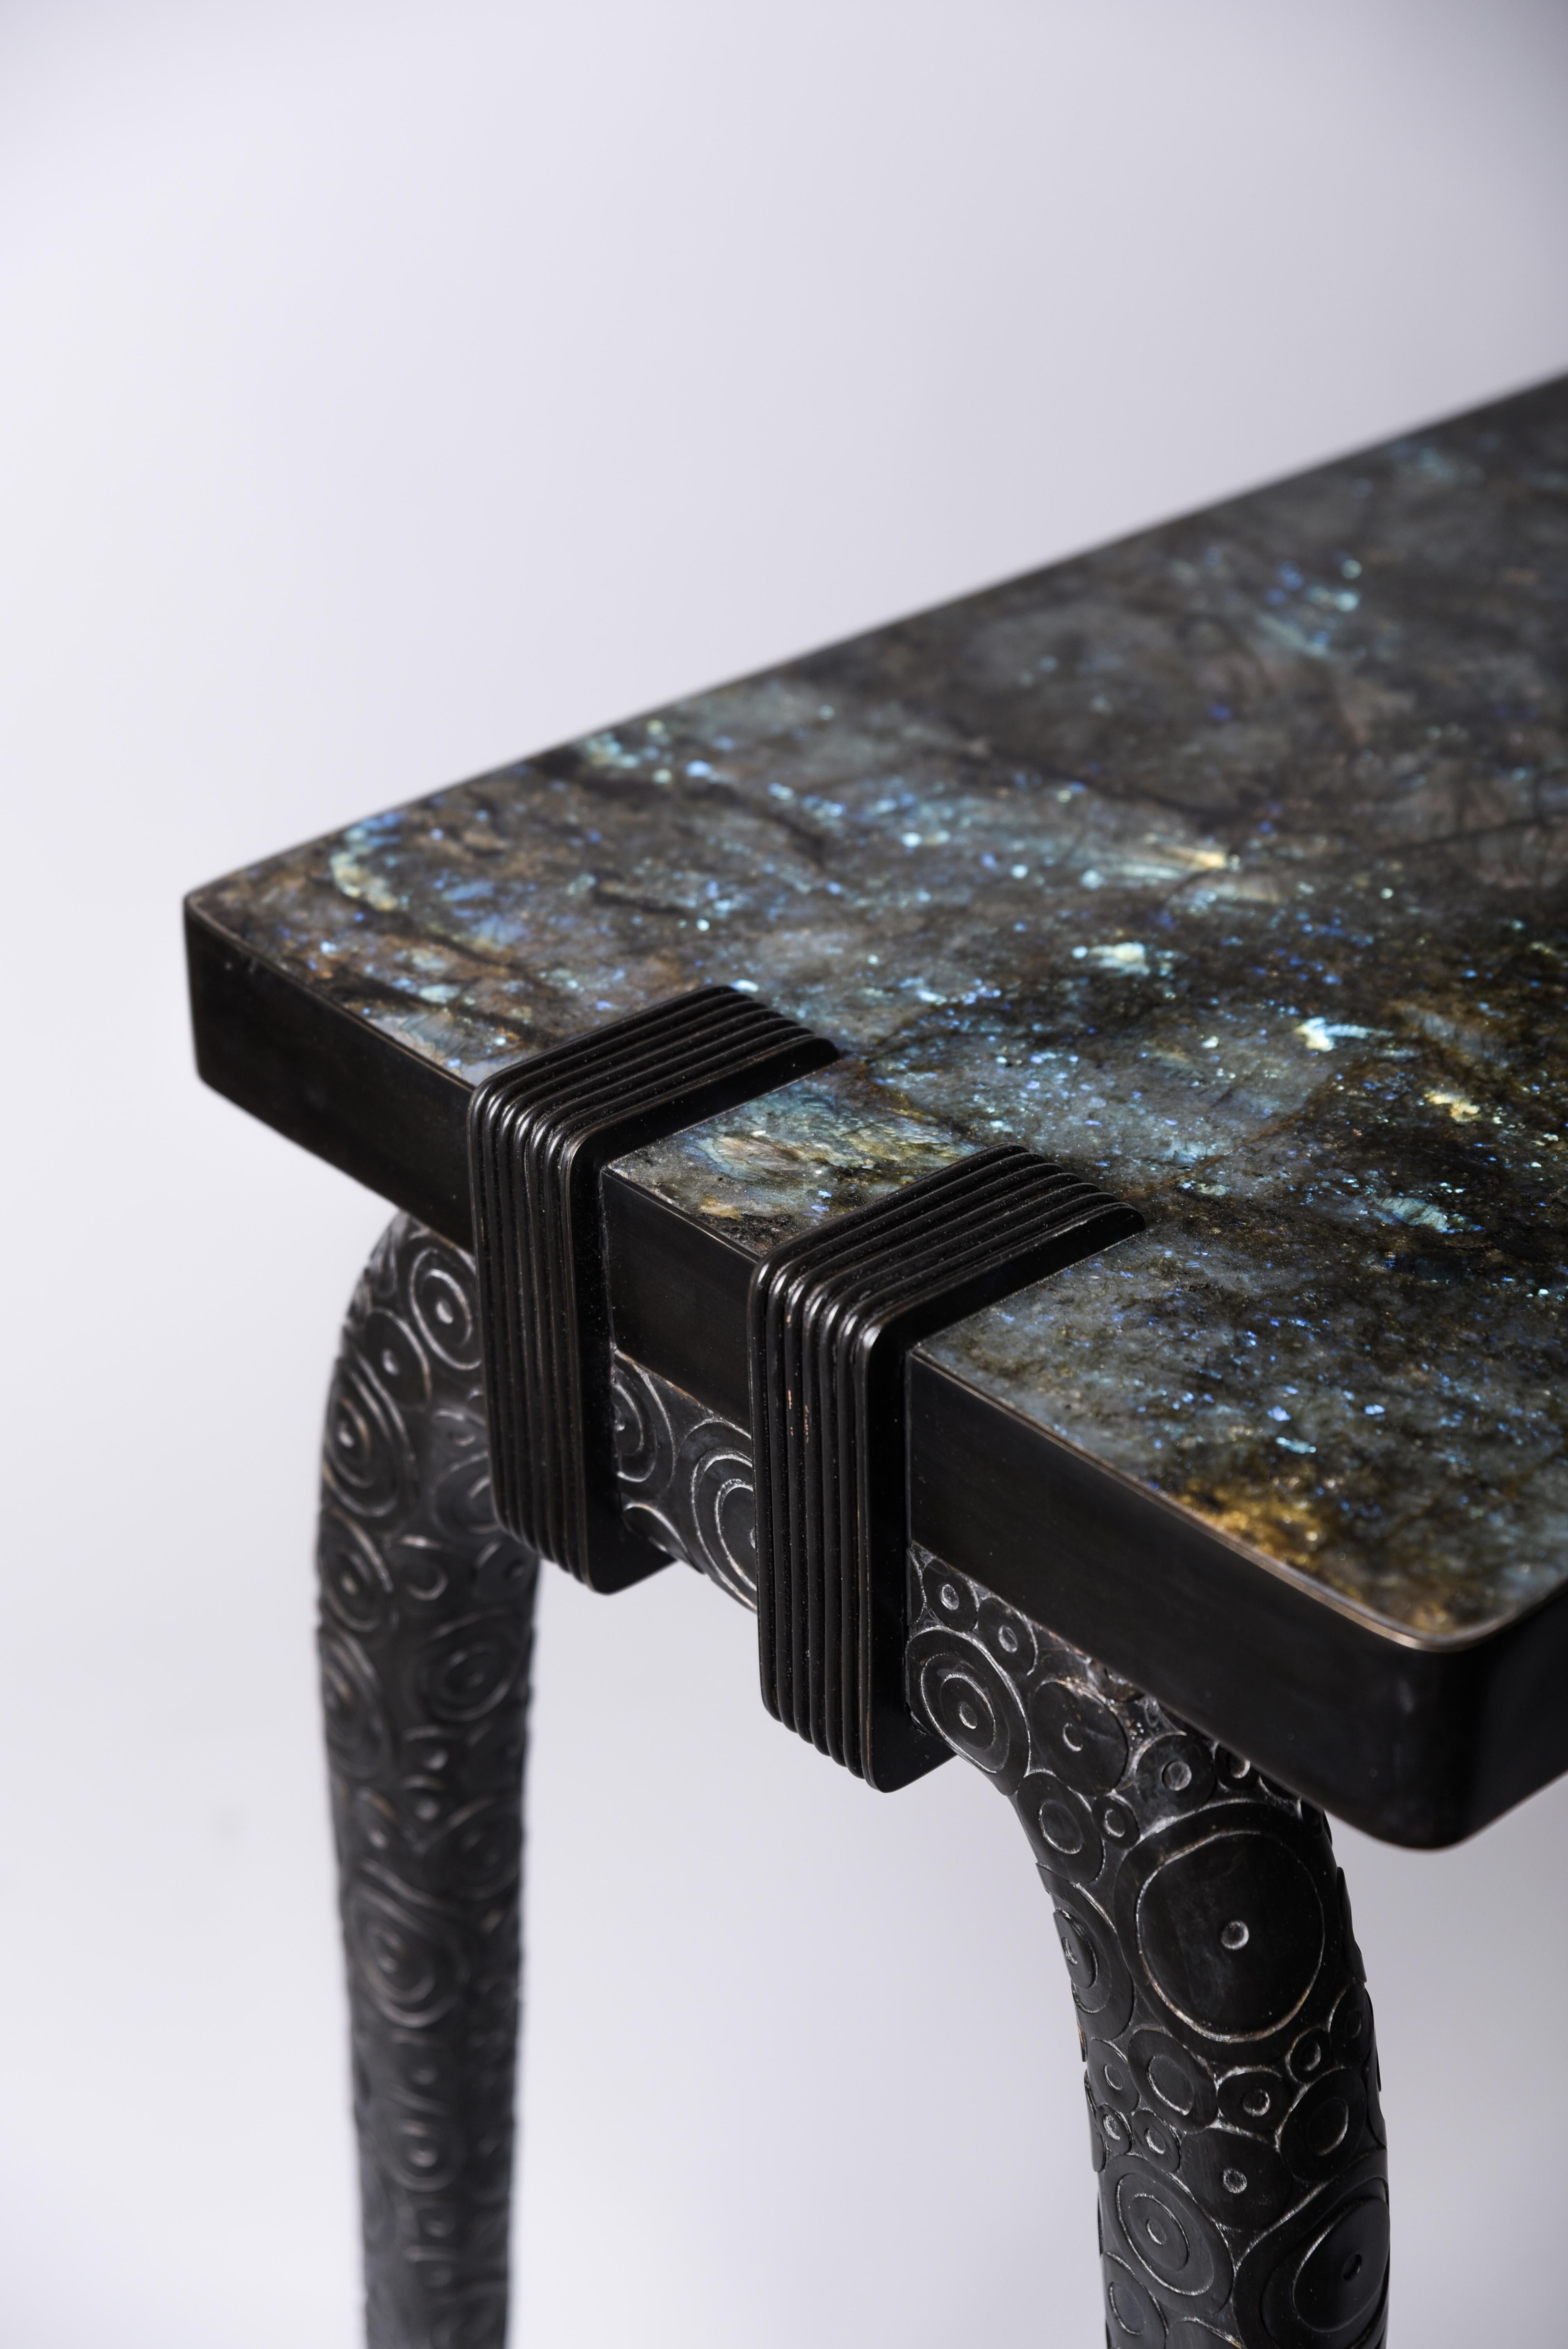 The iconic console is the perfect statement piece for any room. An incredible “duo” between the dreamy Lemurian top, with blue and black tonalities in it, and the dark bronze-patina brass base. The circle inlay work on the legs makes this piece